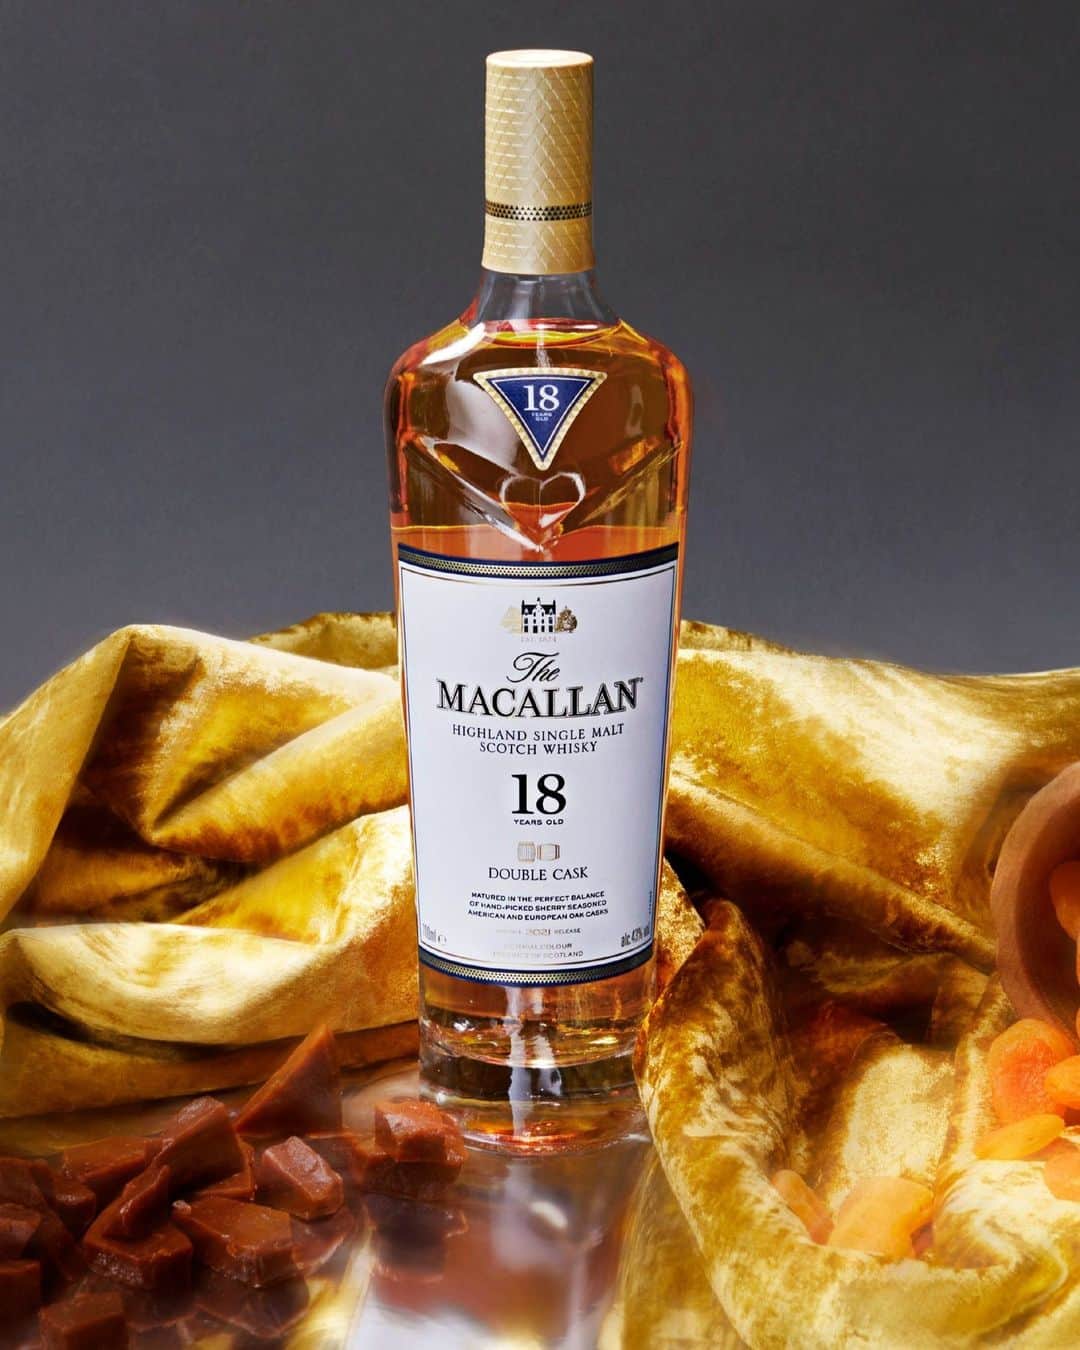 The Macallanのインスタグラム：「A collaboration between The Macallan and acclaimed artist @erikmadiganheck captures the prominent tasting notes of The Macallan Double Cask 18 Years Old.⁣ ⁣ Depicting the key flavours of treacle toffee, sweet ginger, dried fruits and nutmeg, this single malt stands proud as a marker of extraordinary craftsmanship. The gold velvet nods to the whisky’s harmonious balance of flavour and long, warm finish.⁣ ⁣ Crafted without compromise. Please savour The Macallan responsibly.⁣ ⁣ #TheMacallan #TheMacallanDoubleCask」